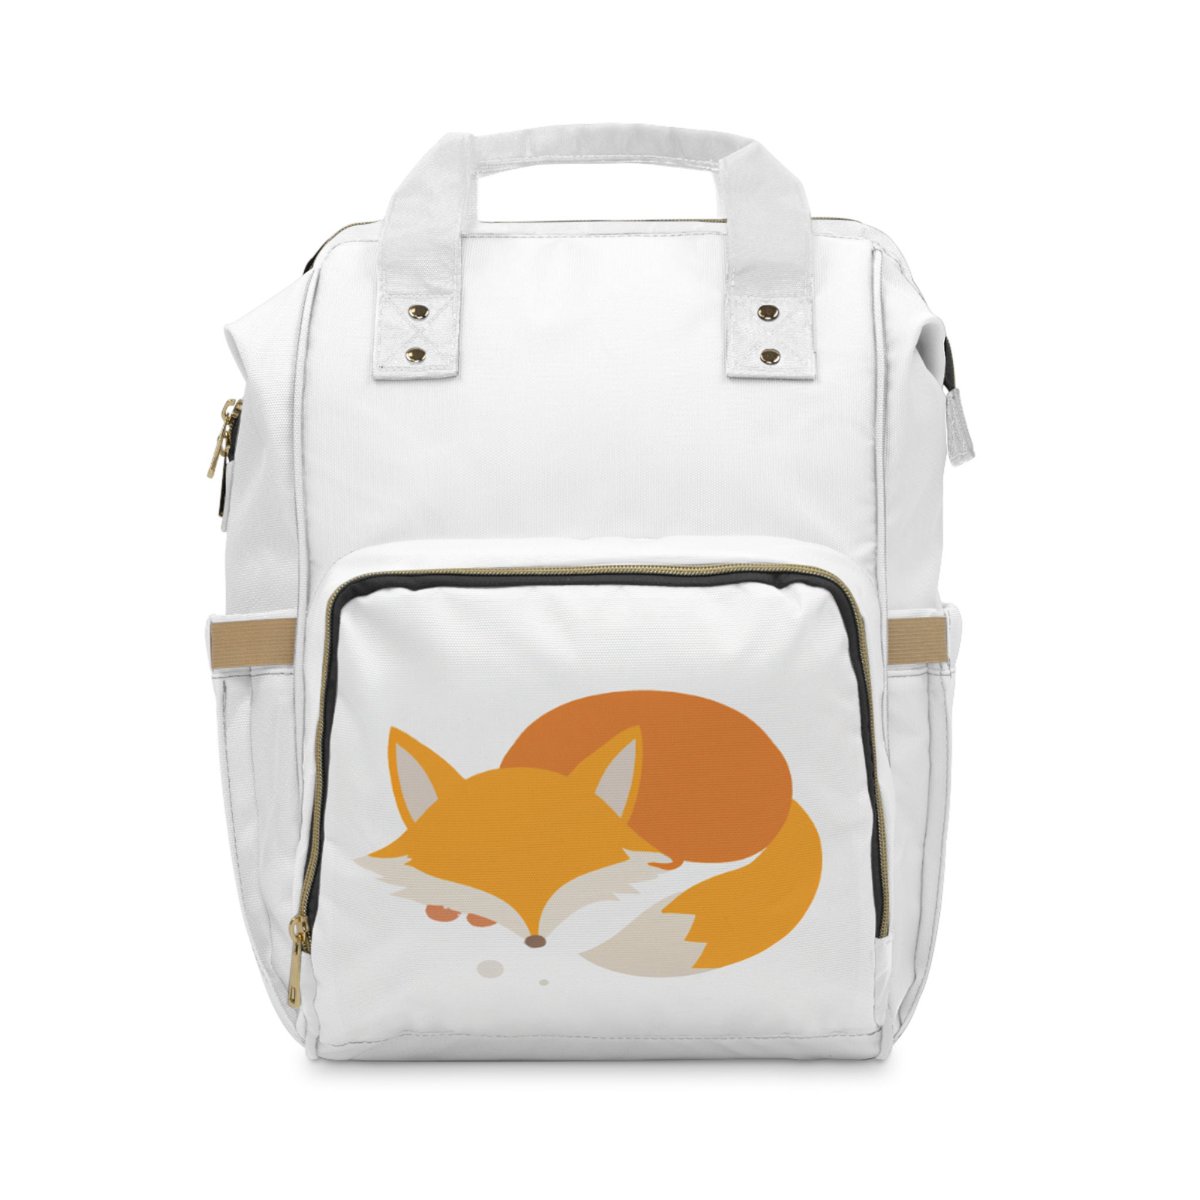 Excited to share the latest addition to my #etsy shop: Multifunctional, Vector Sleeping Fox Design, High-Grade Nylon, Diaper Backpack etsy.me/3WGJ3wD #white #orange #shoulder #nylon #nylonbackpack #graphicbackpack #whitebackpack #bag #lightweightbag